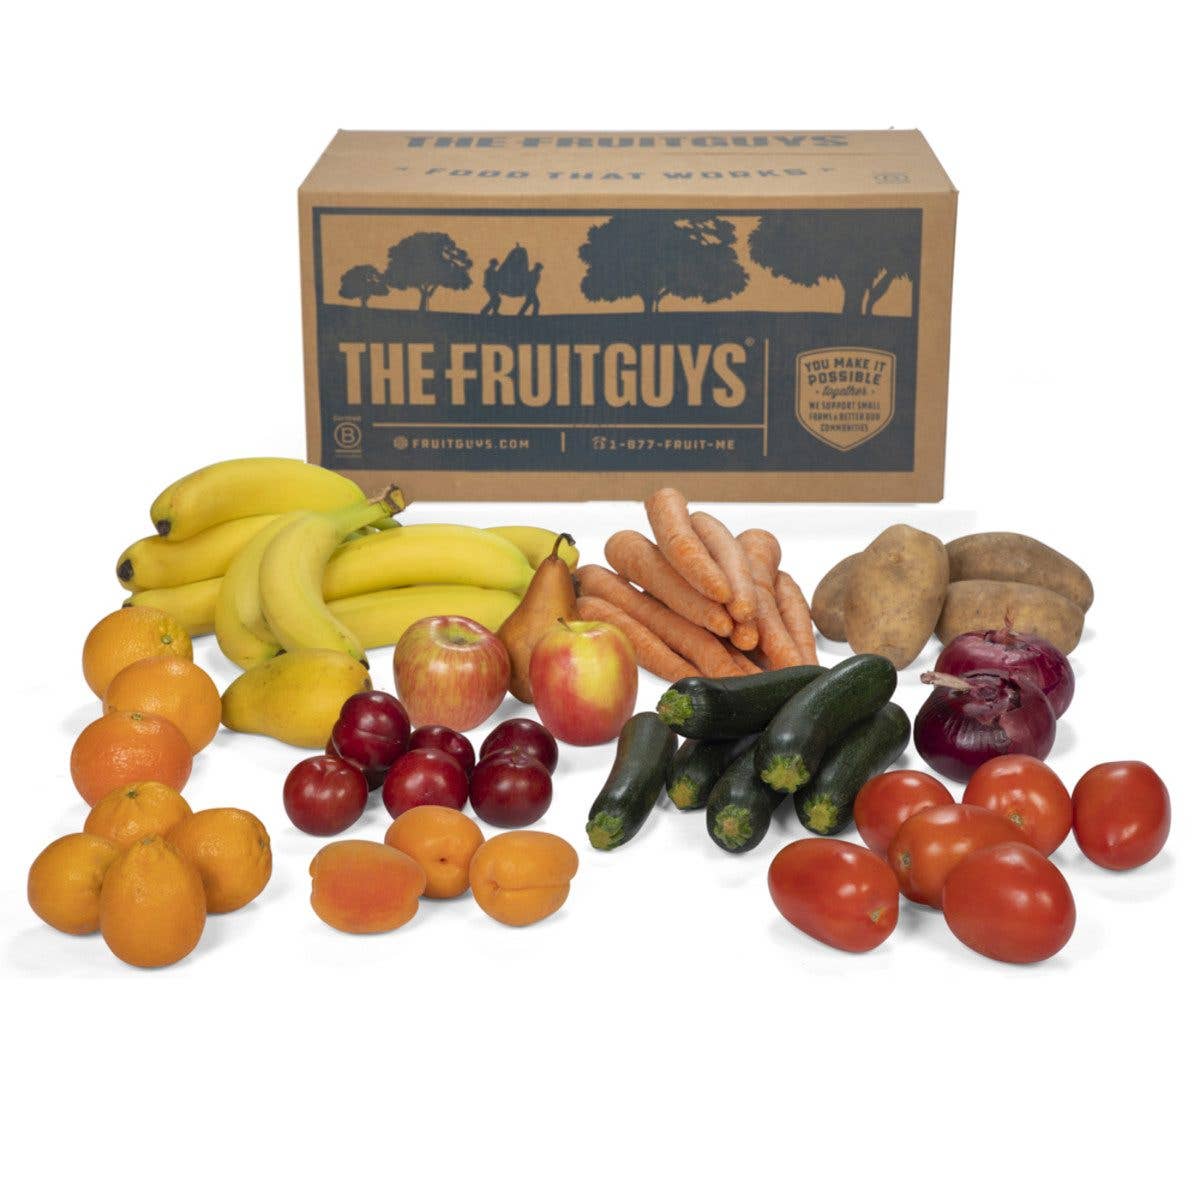 The Fruitguys Produce Delivery Box